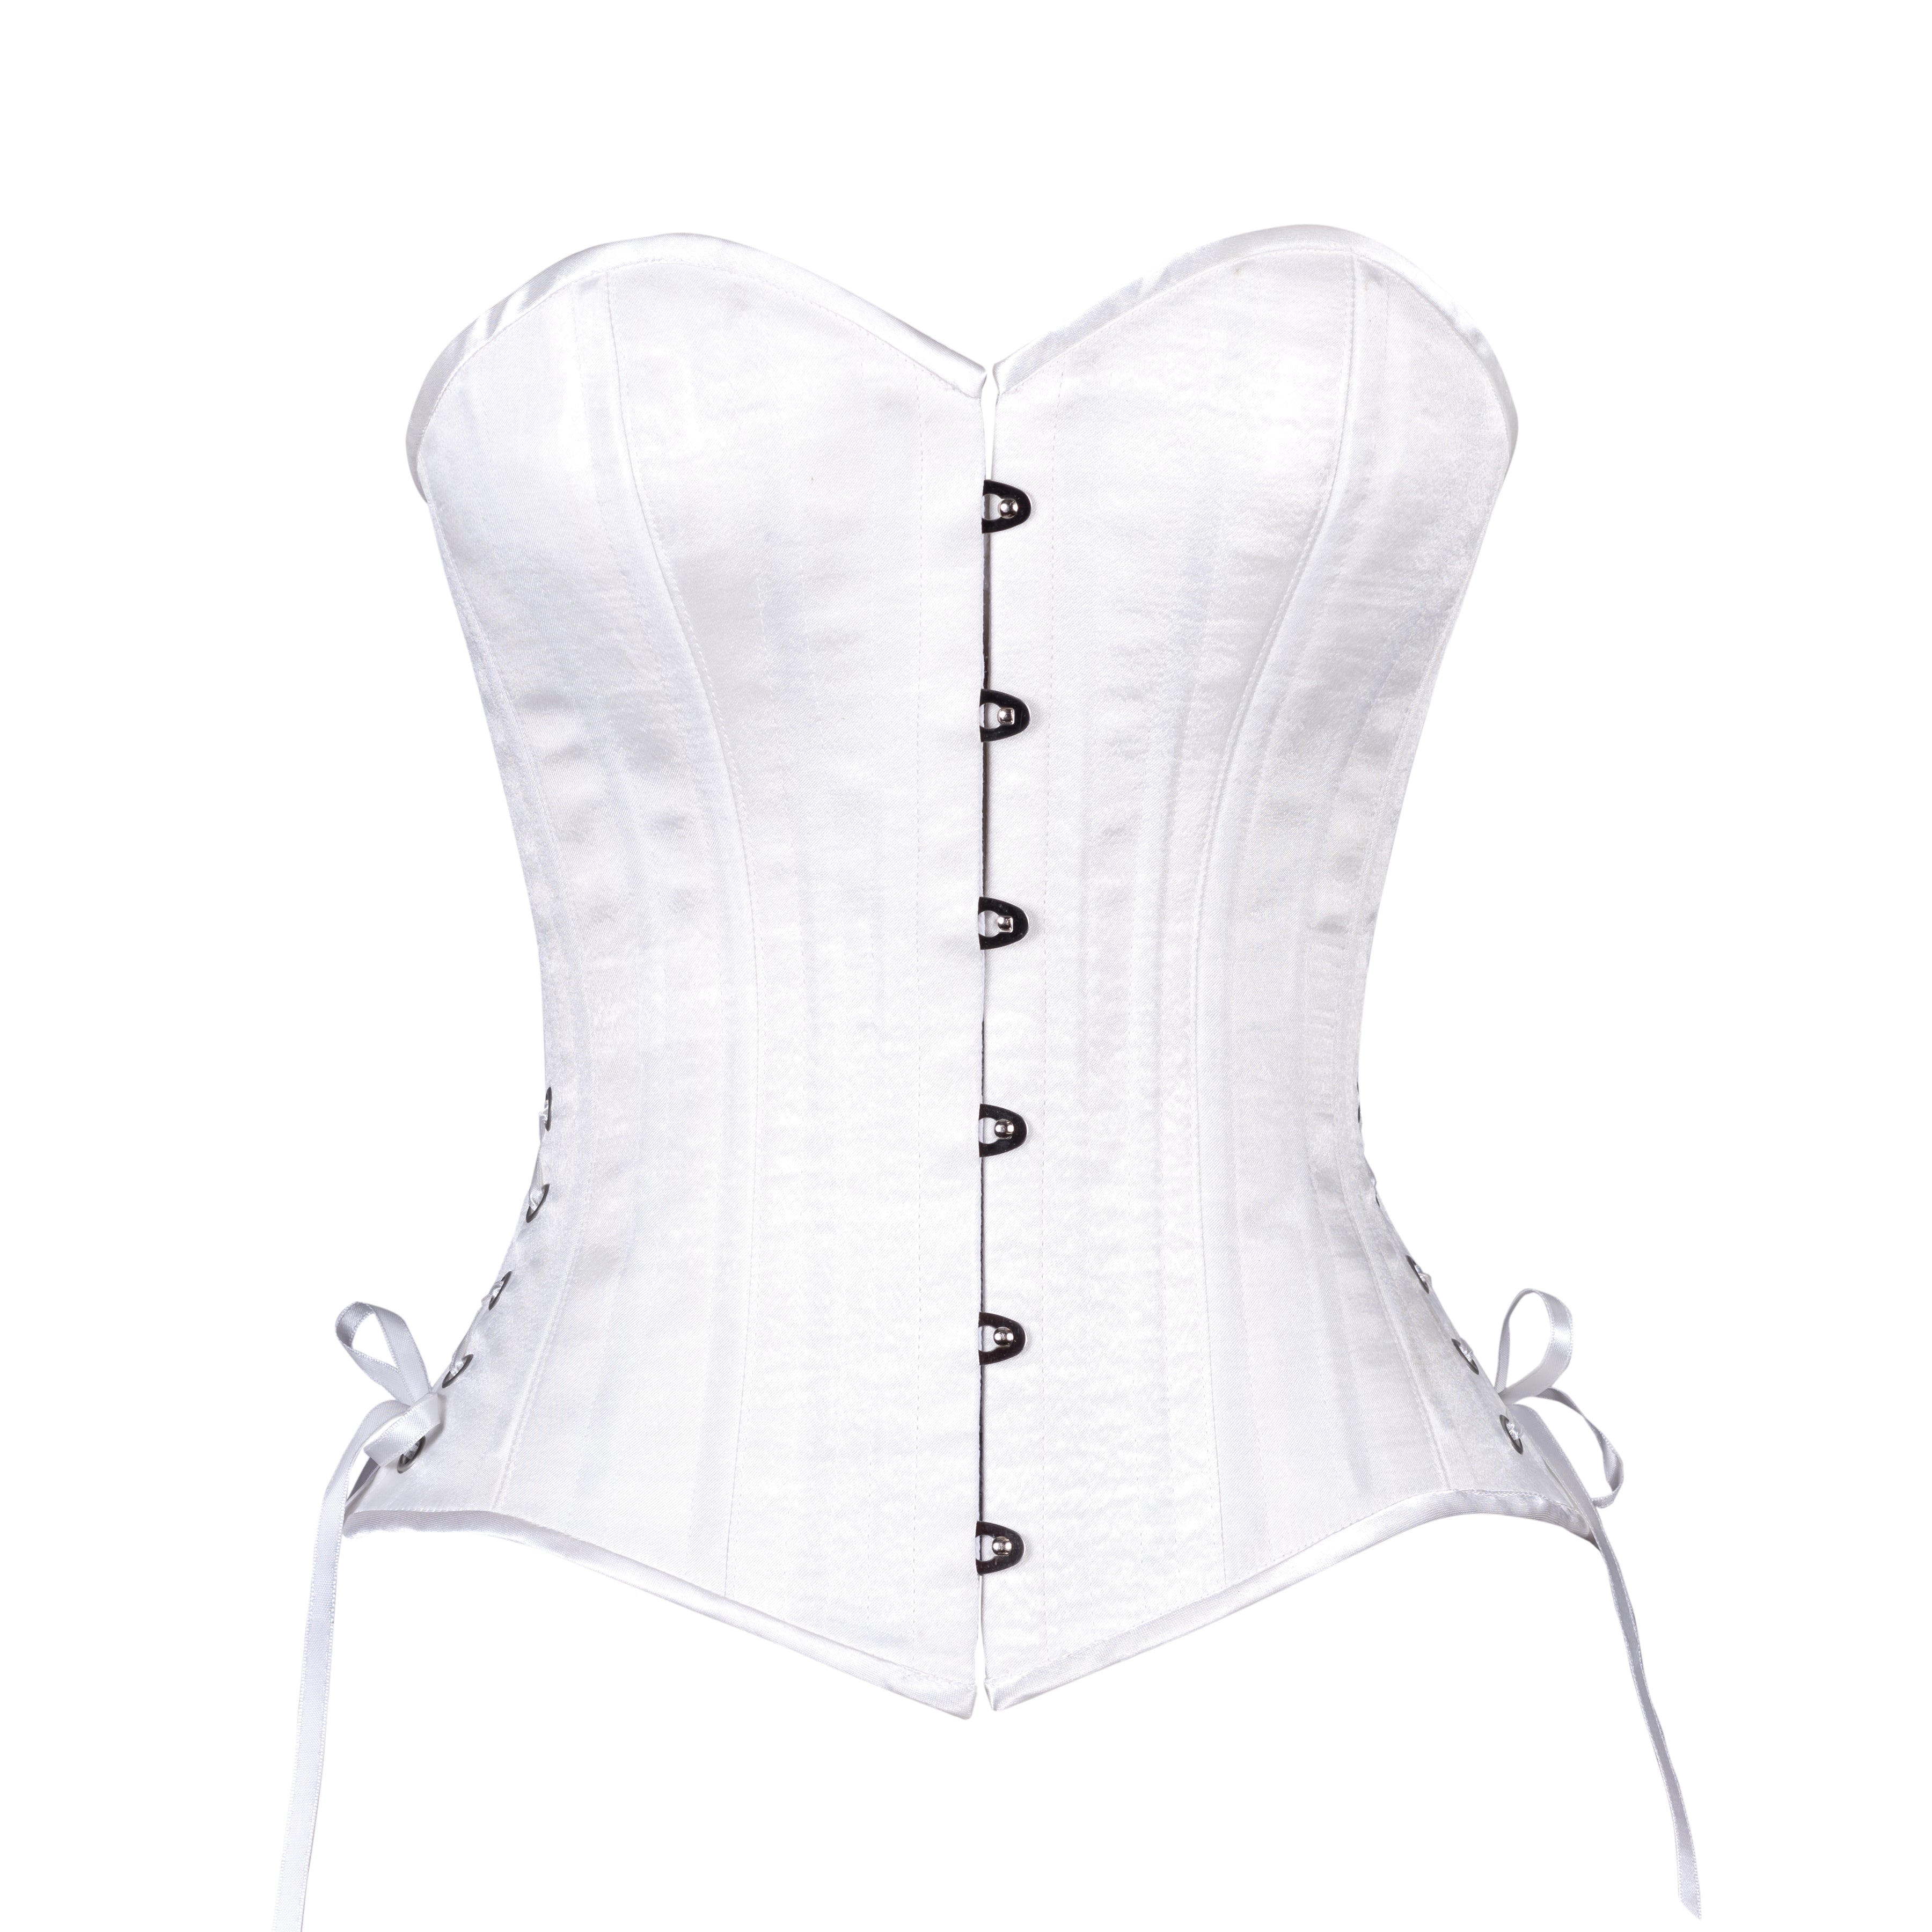 Luxury Pure White Satin Corset/ Inserted Pads Corset/ Classical Wedding  Corset/ White Wedding Corset/ Tie Back Corset/ Cupped Corset -  UK